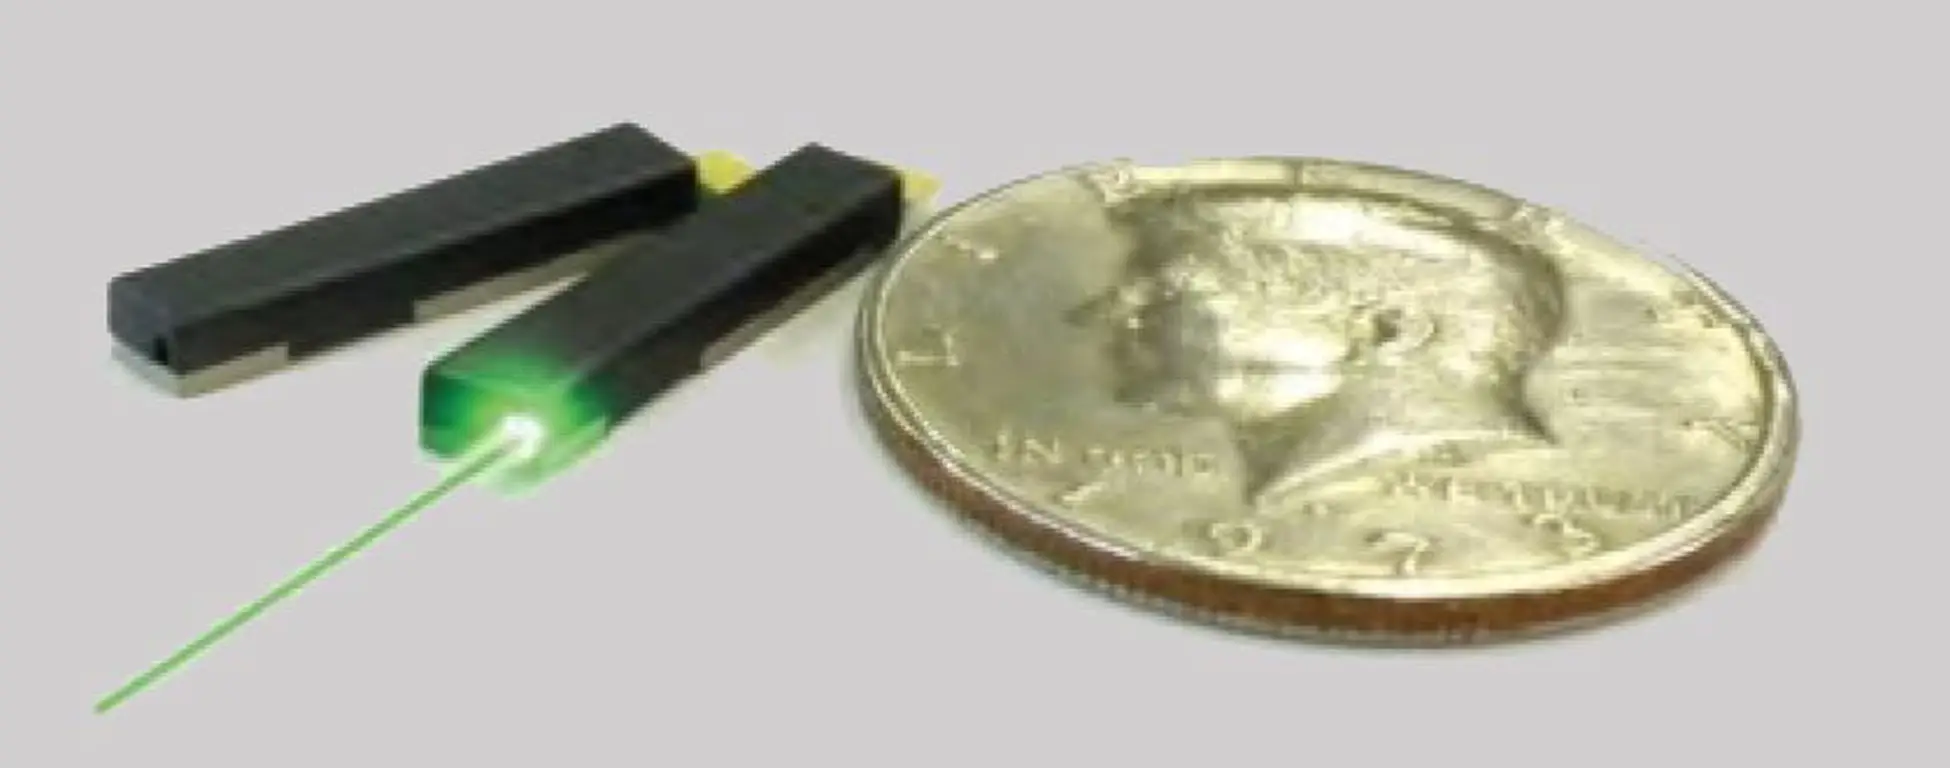 Compact single frequency visible laser diode module